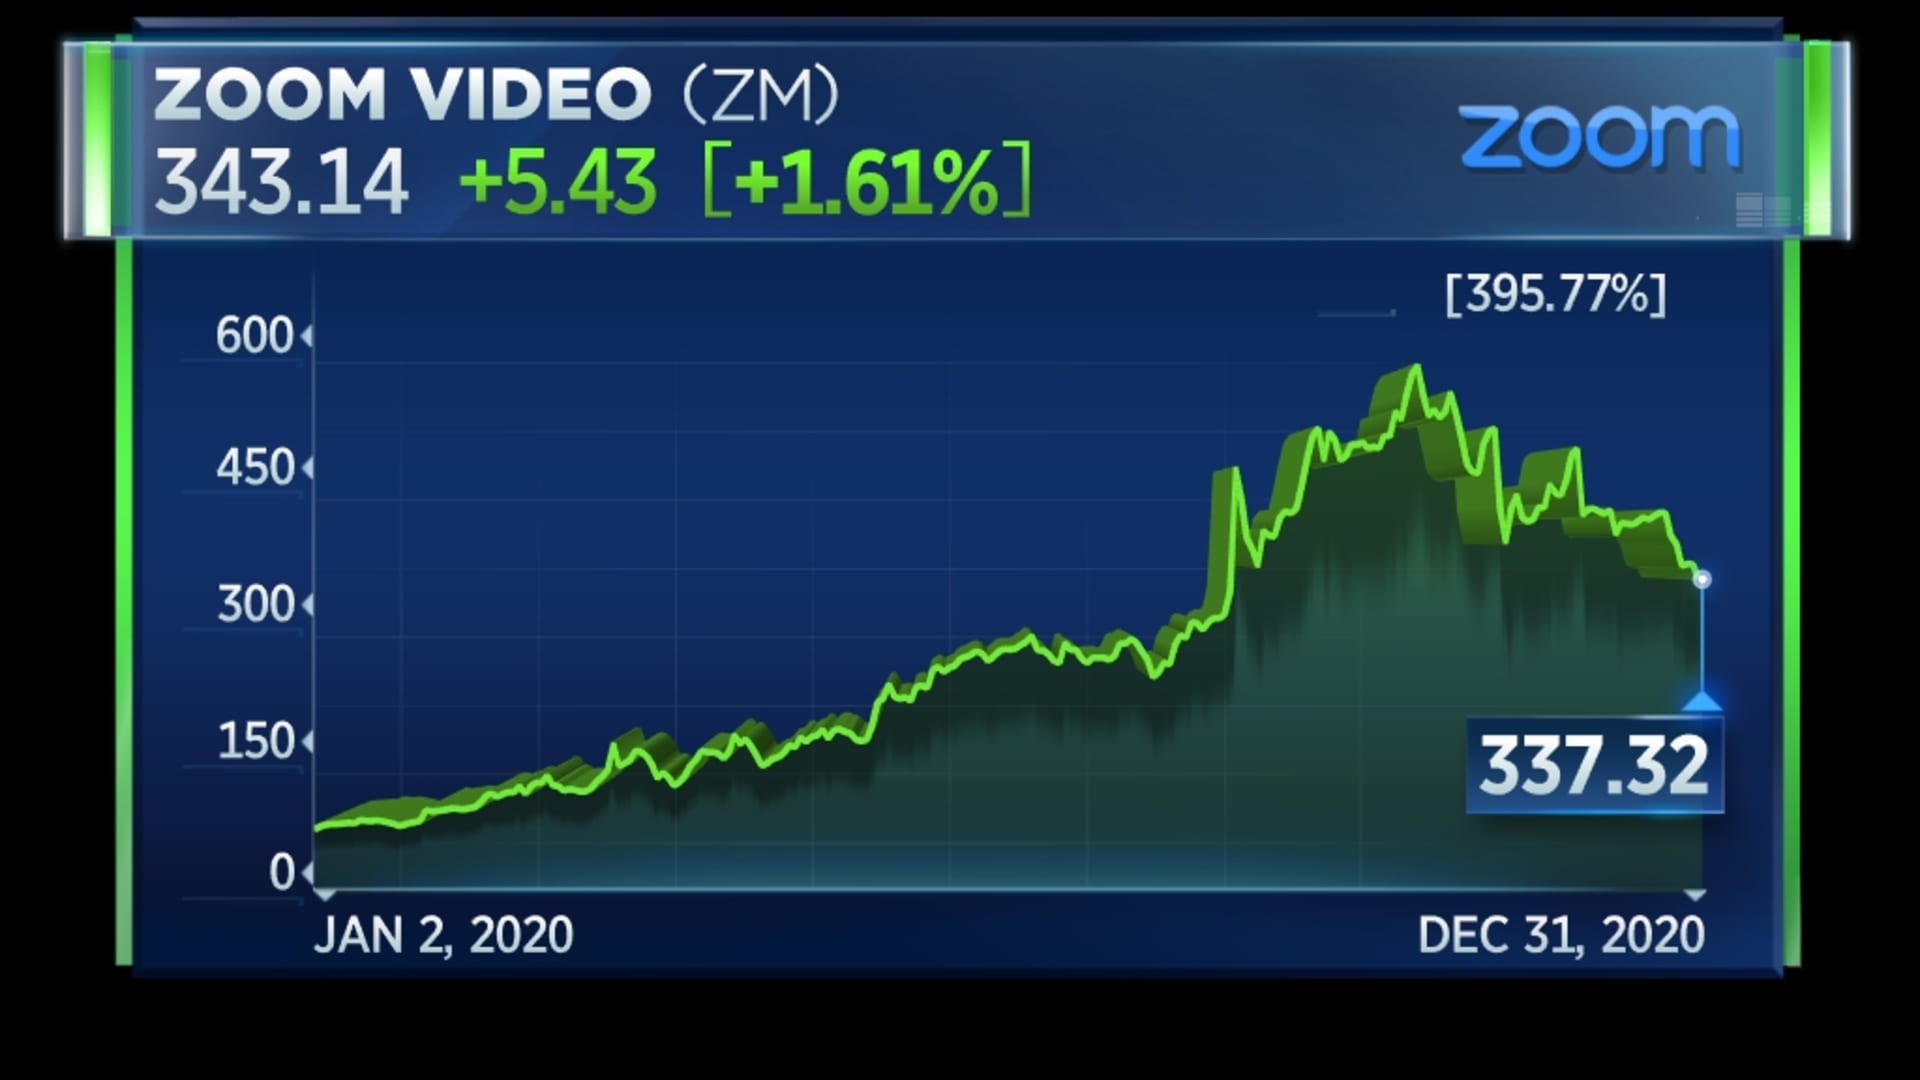 Zoom's stock rally in 2020